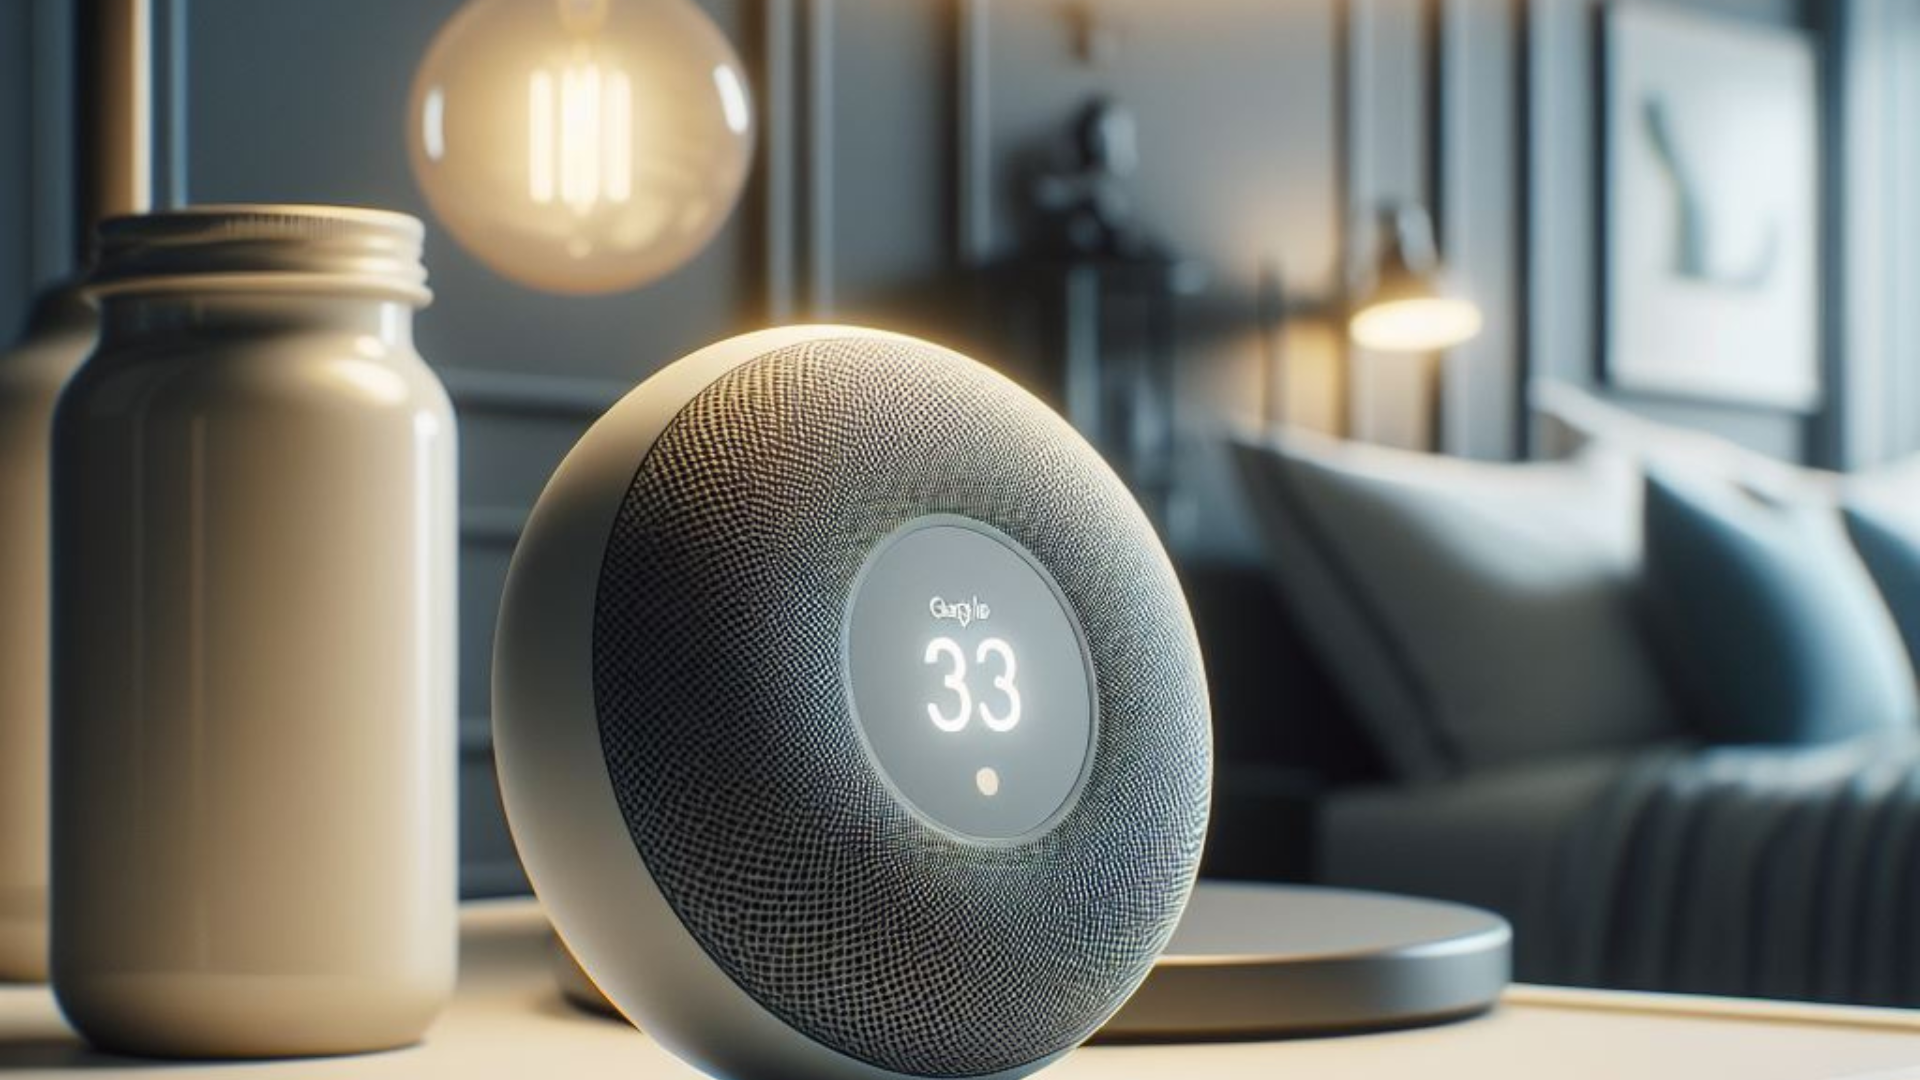 Discover if the Google Nest Mini comes with a camera, its features, and privacy benefits. Explore voice control, portability, and smart home integration.